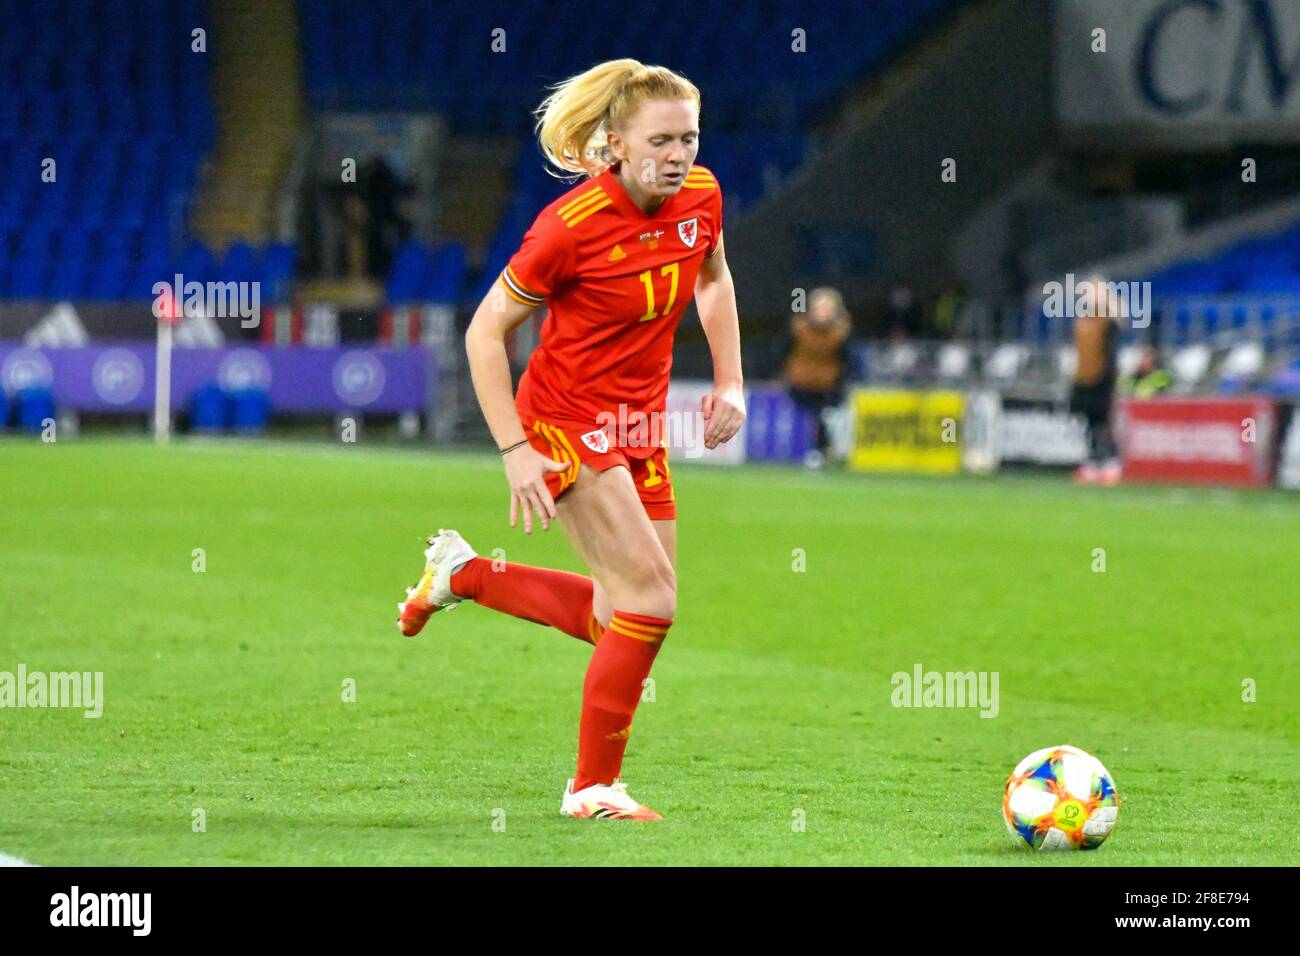 Cardiff, Wales. 13 April, 2021. Ceri Holland of Wales Women in action during the Women's International Friendly match between Wales and Denmark at the Cardiff City Stadium in Cardiff, Wales, UK on 13, April 2021. Credit: Duncan Thomas/Majestic Media/Alamy Live News. Stock Photo